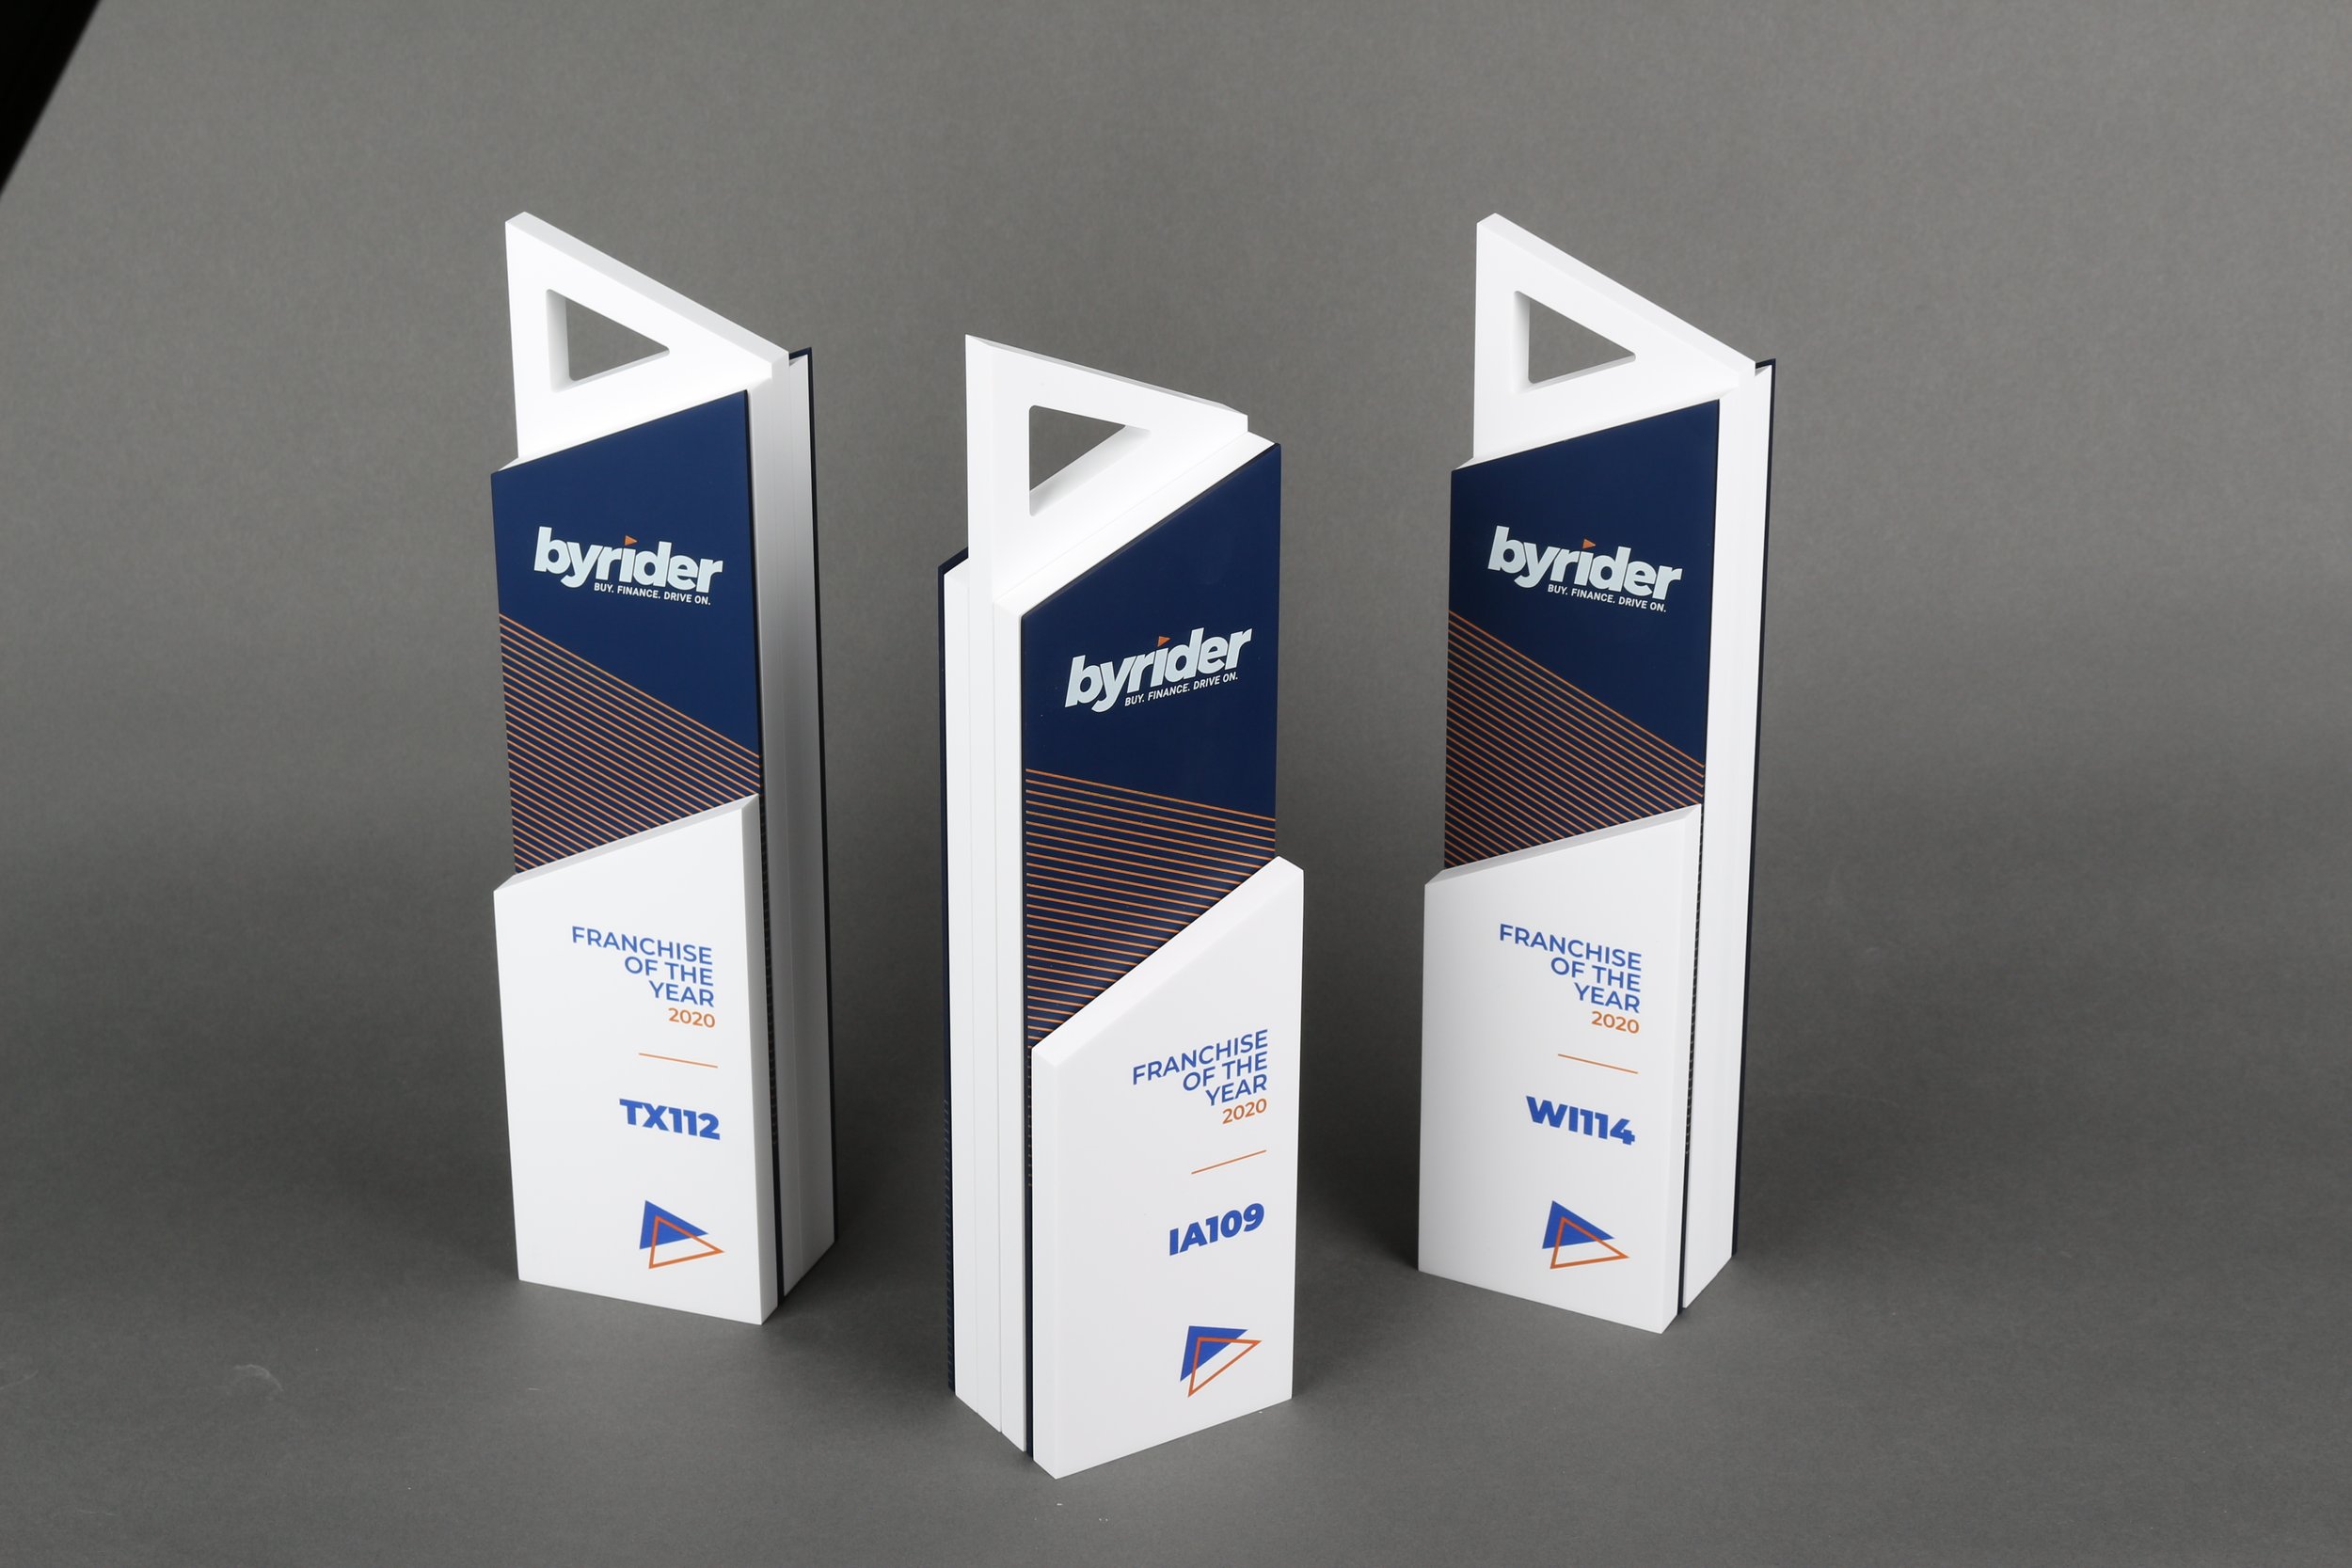 byrider annual conference awards custom design wow factor 